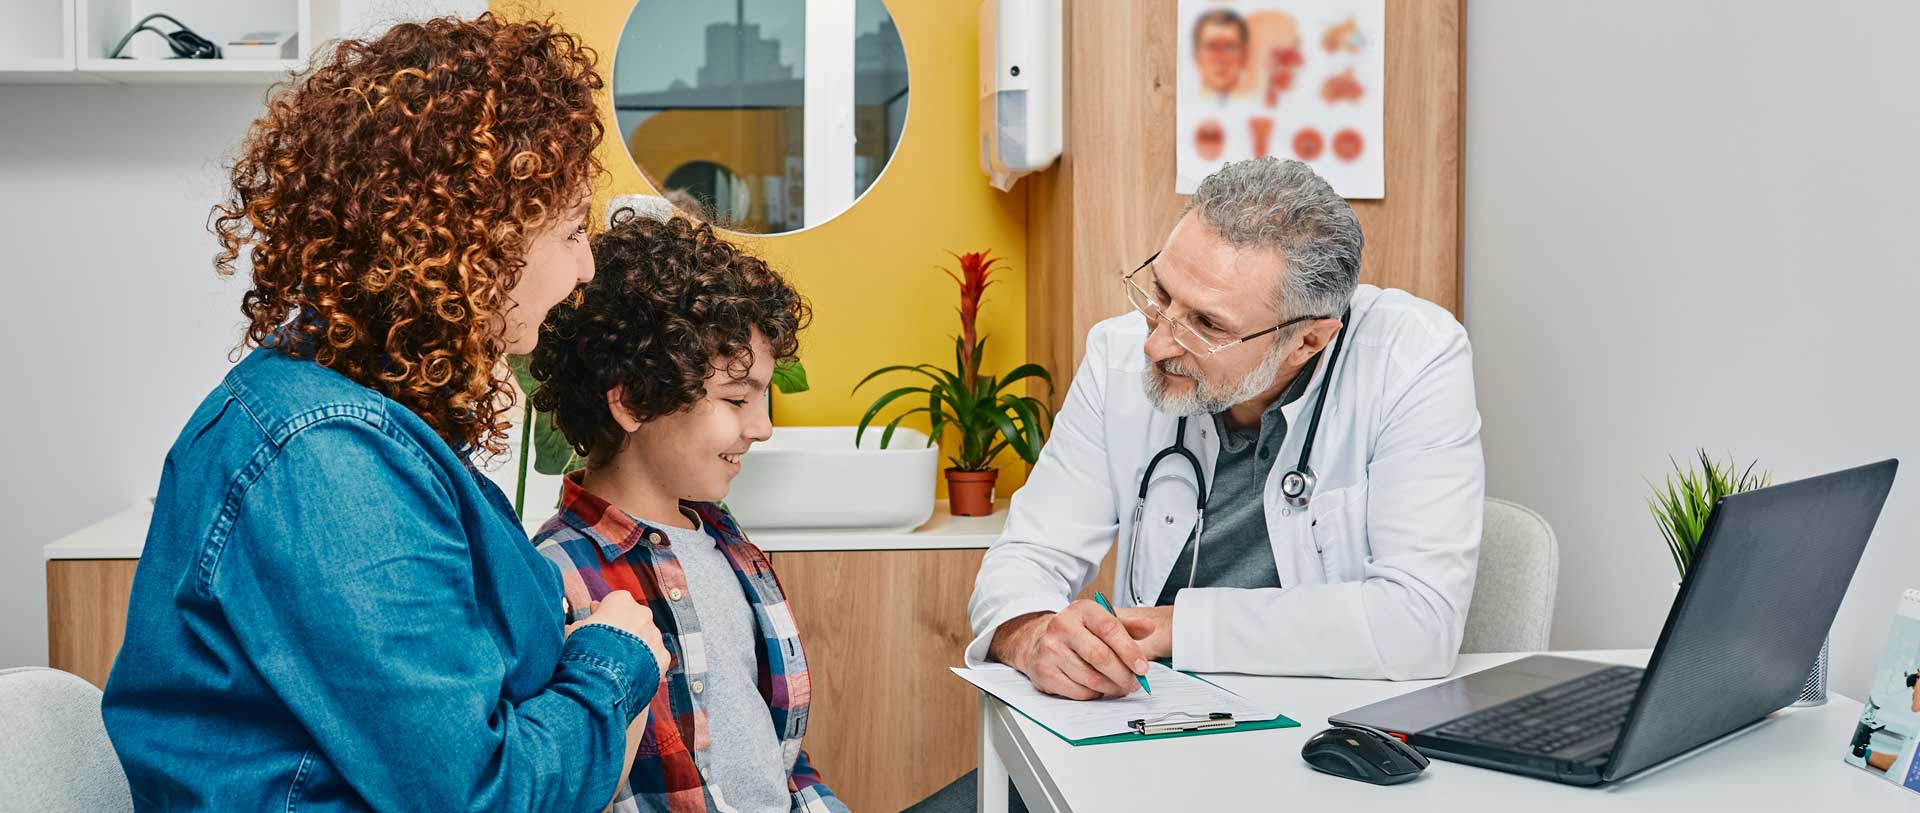 Accepting New Patients at Jeffers, Mann & Artman Pediatric and Adolescent Medicine, P.A. | Raleigh Area Pediatricians